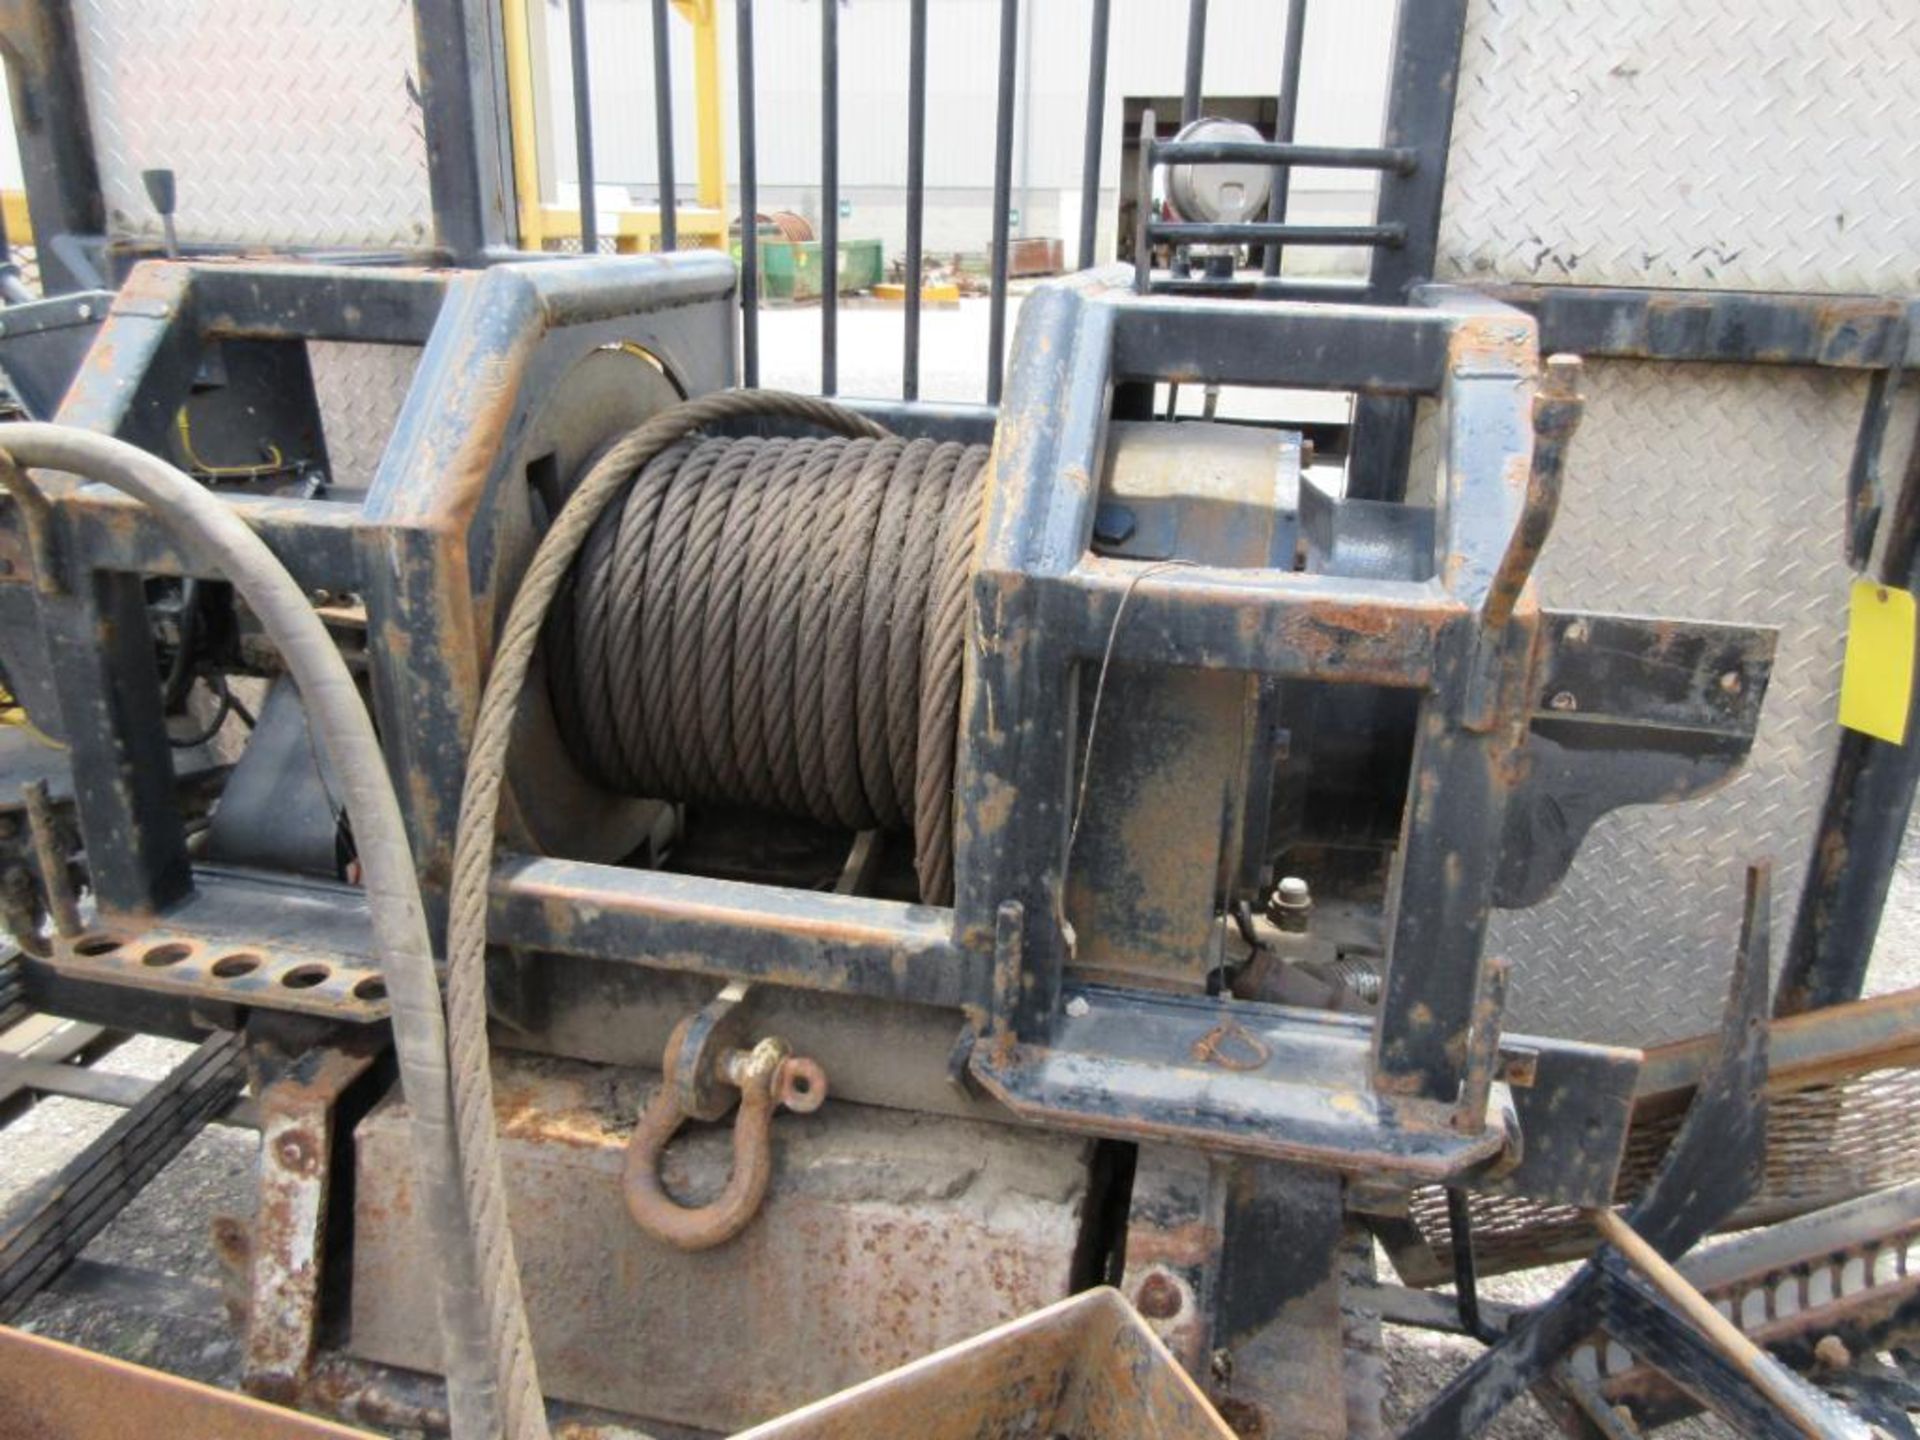 TULSA 80,000 LB. RUFNEK ROLL OFF WINCH, 1 1/4'' DIA. BRAIDED CABLE, DIAMOND PLATE CAB SHIELD - Image 2 of 4